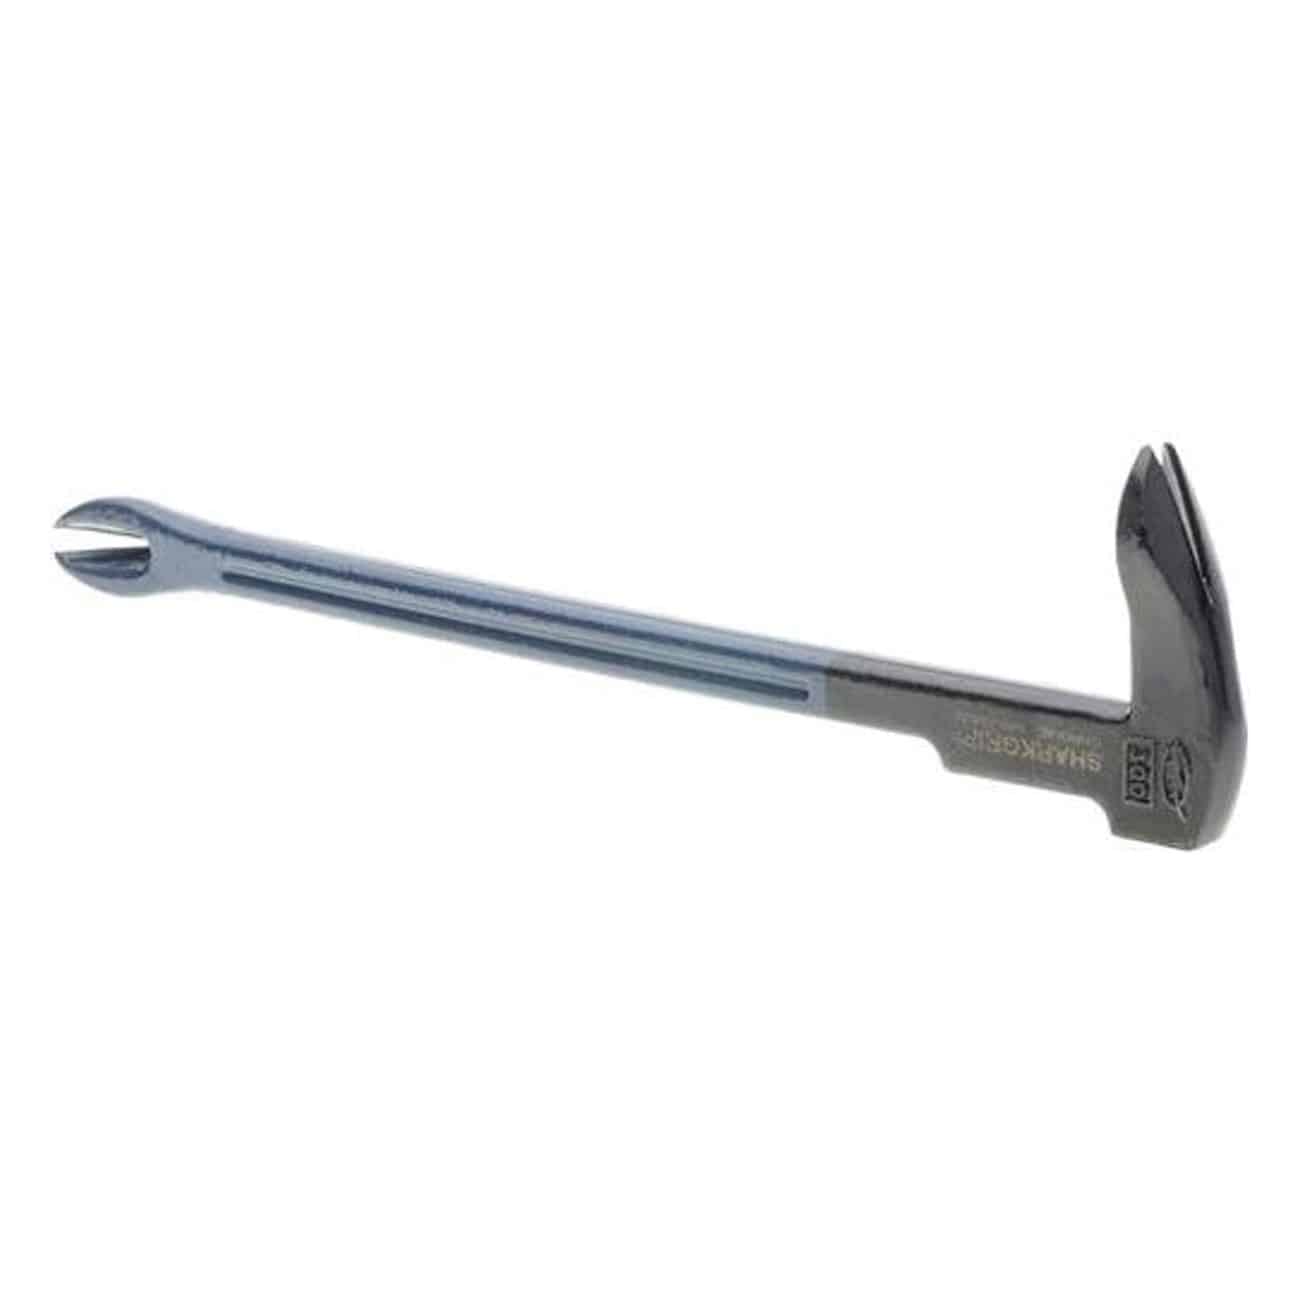 Shark Nail Puller - 10 Best Nail Pullers - Comprehensive Reviews and Buyer's Guide - HandyMan.Guide - Nail Puller